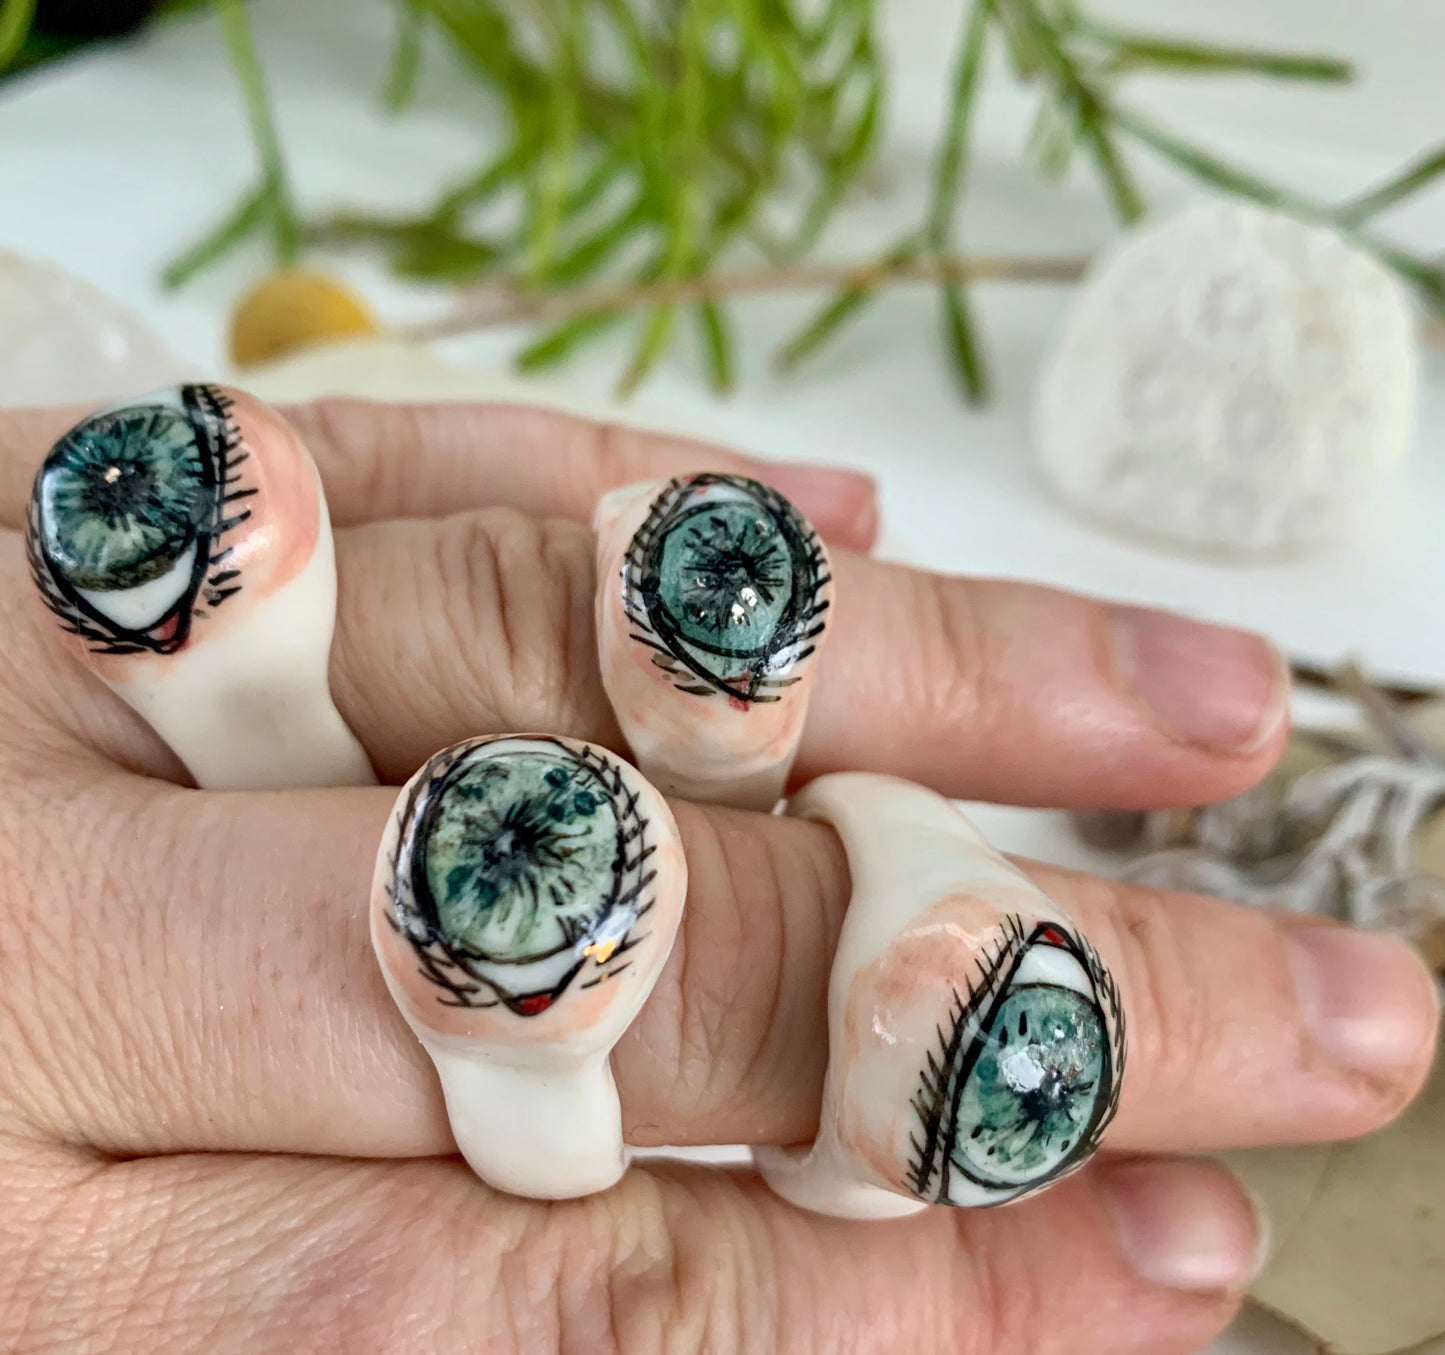 Hand painted porcelain‘the protective eye’ ring, choose a size